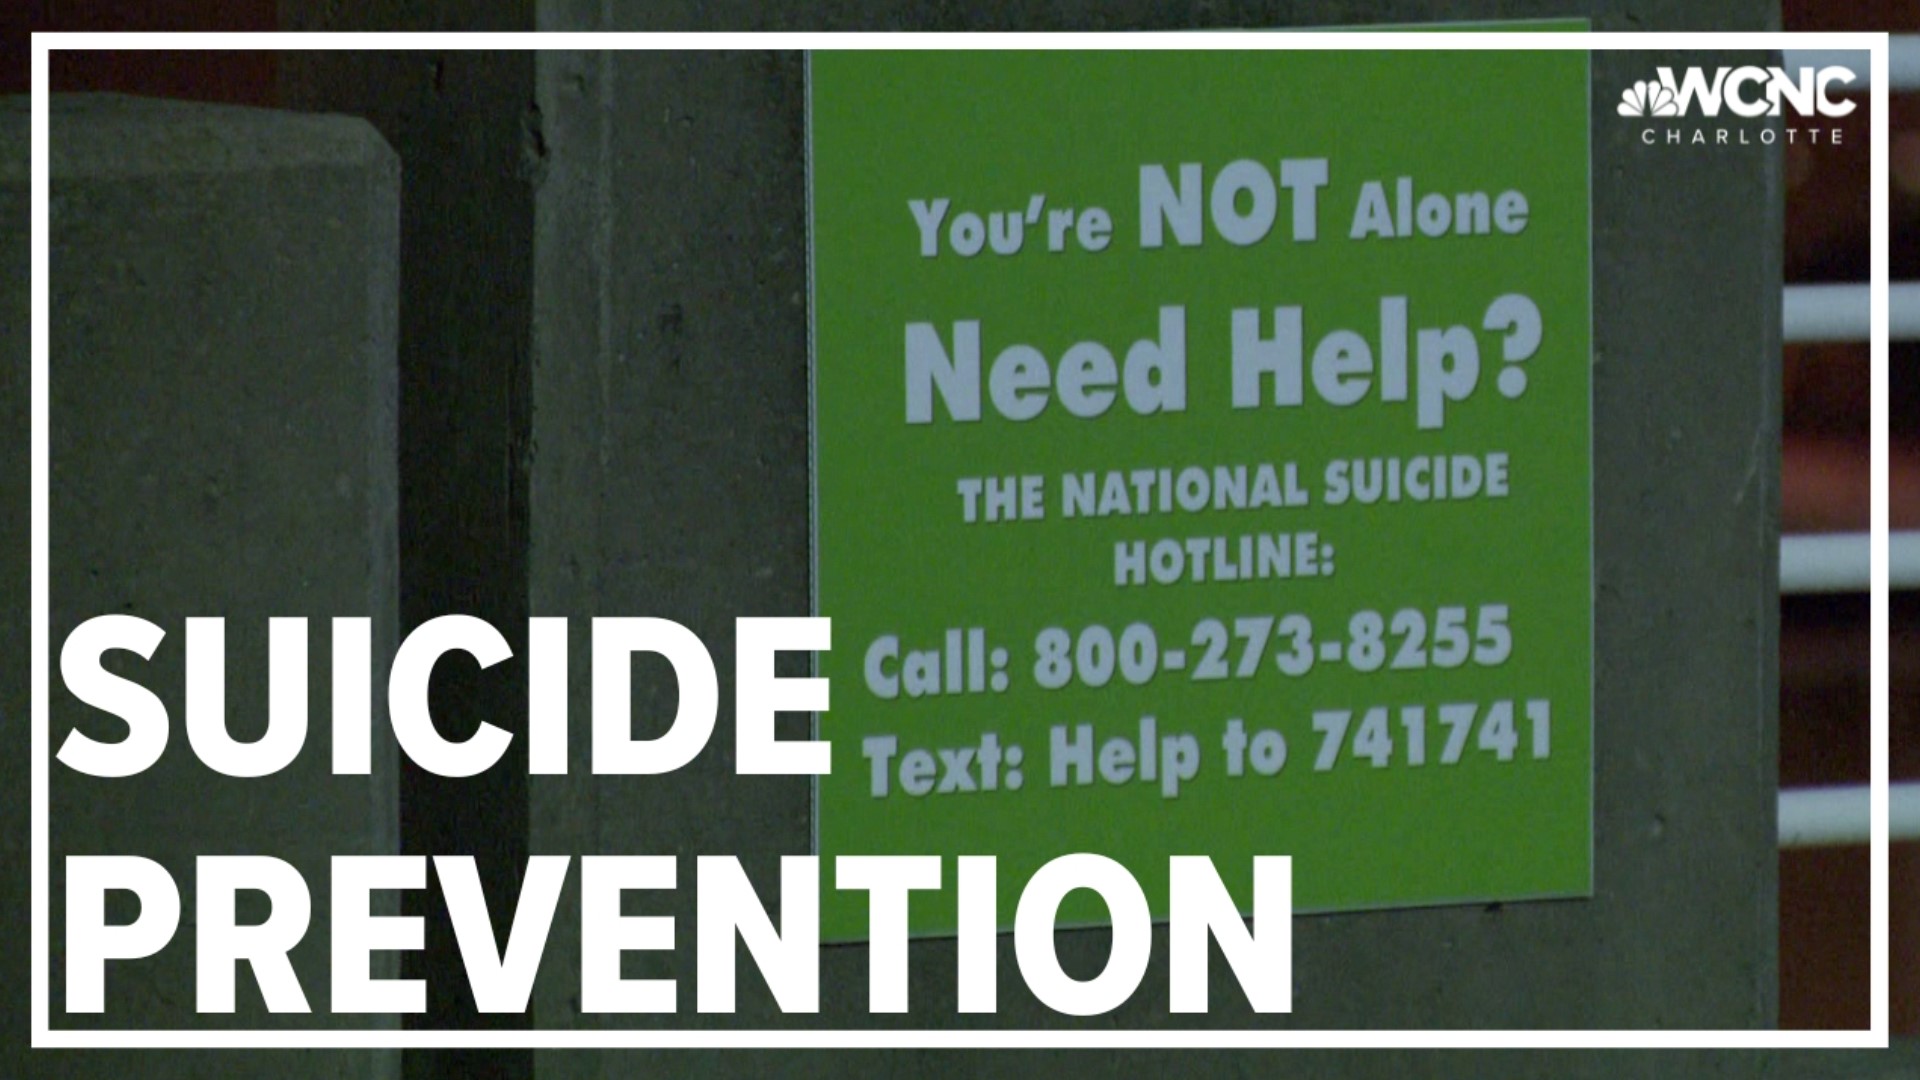 Green signs with the suicide prevention hotline phone number have been placed in parking decks across the Queen City.